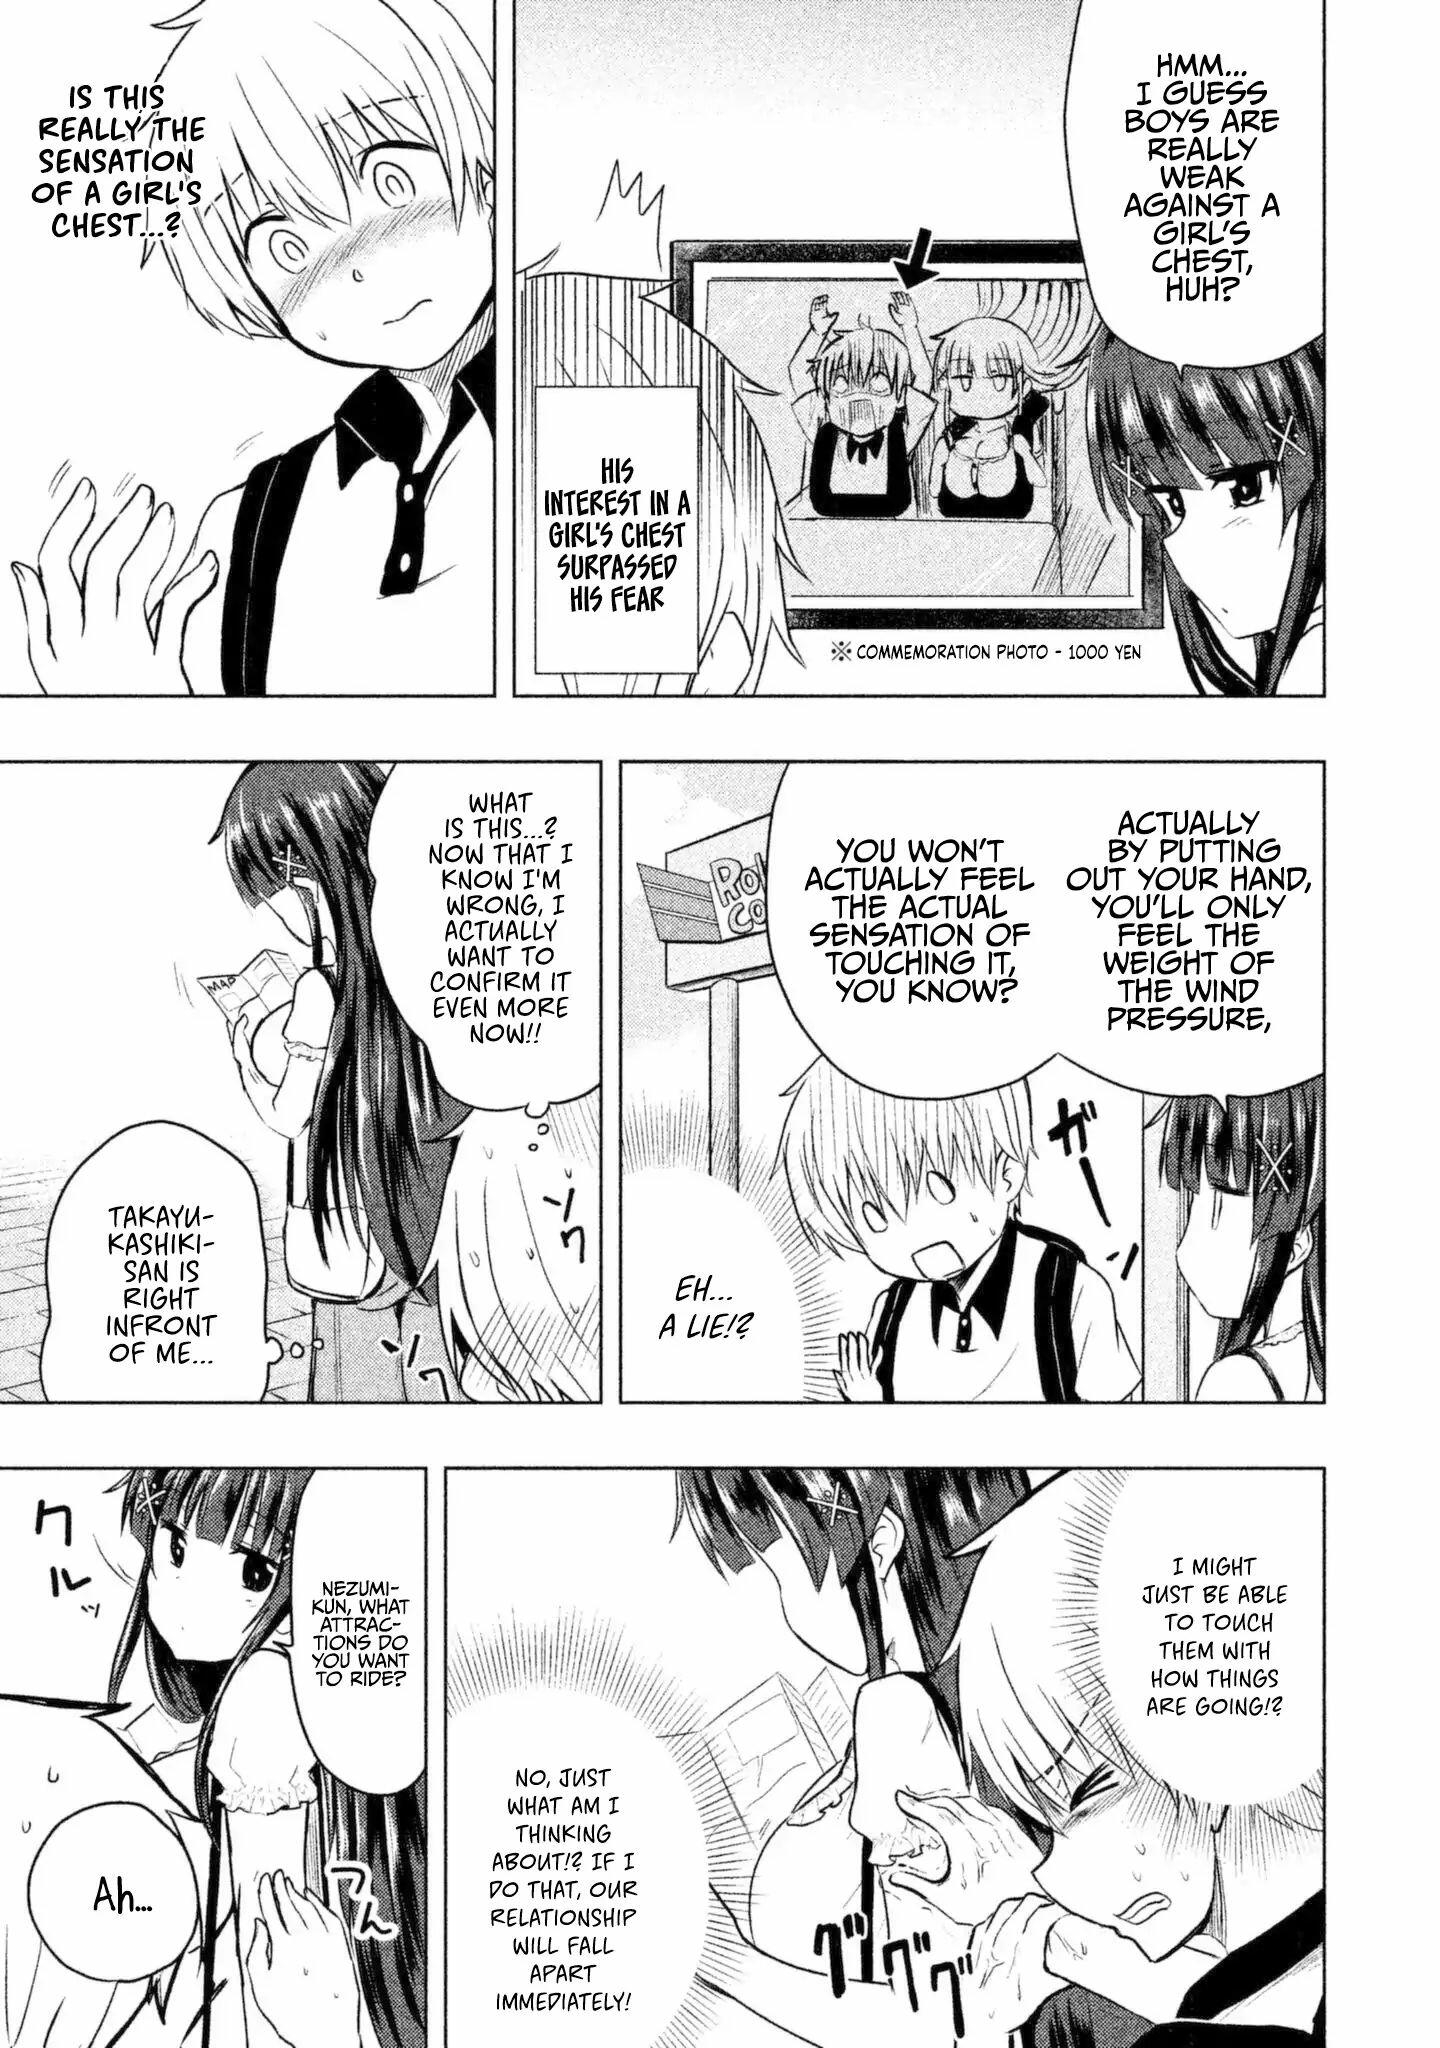 A Girl Who Is Very Well-Informed About Weird Knowledge, Takayukashiki Souko-San Vol.1 Chapter 7: Sensation page 4 - Mangakakalots.com